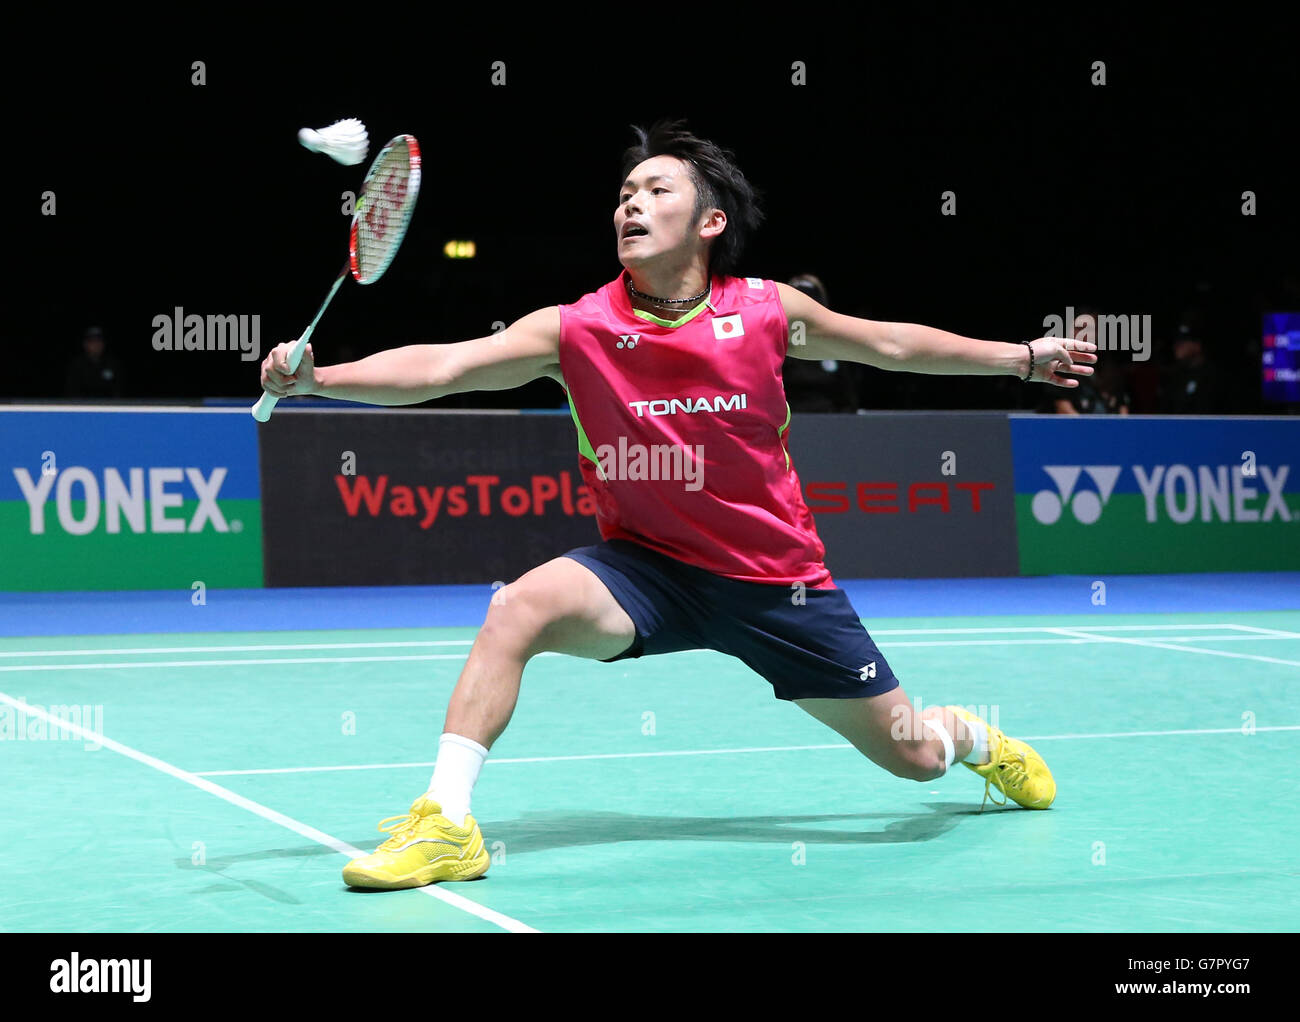 Badminton - 2015 Yonex All England Badminton Championships - Day One - National Indoor Arena. Japan's Takeshi Kamura during his first round doubles match with partner Keigo Sonoda Stock Photo